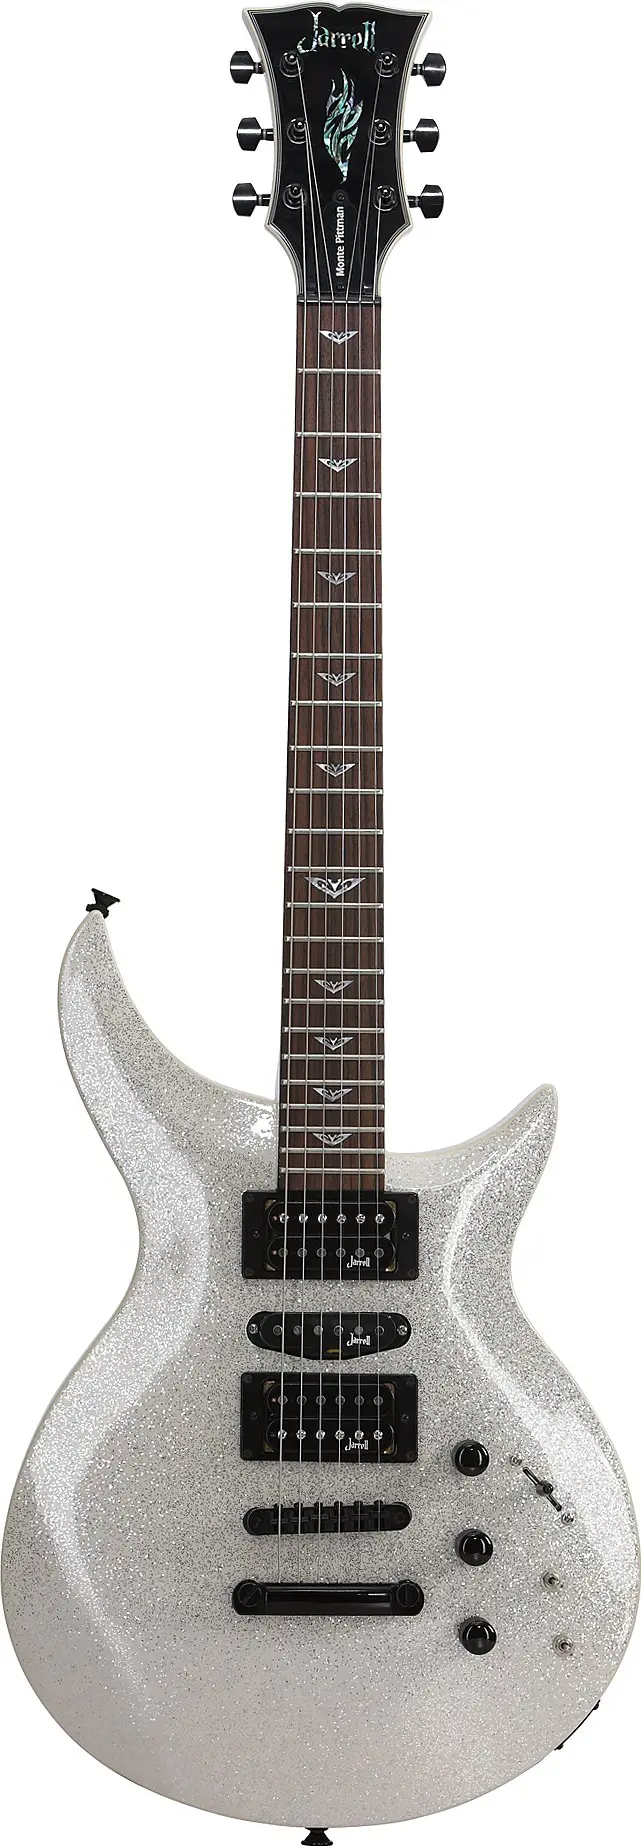 MPS Classic by Jarrell Guitars